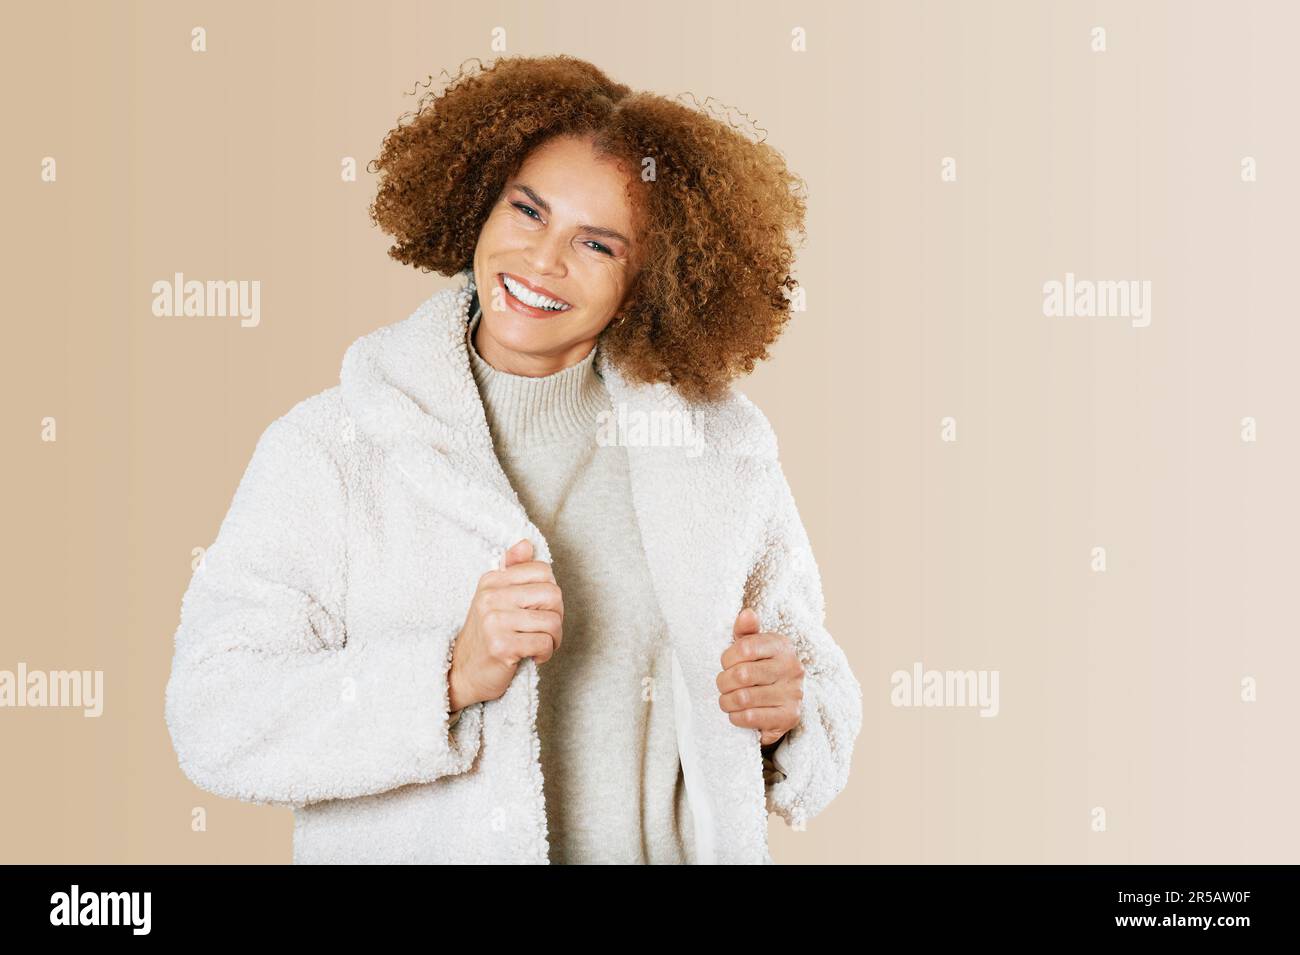 Studio portrait of beautiful middle age woman 50 - 55 years old, wearing natural teddy coat, isolated on beige background Stock Photo